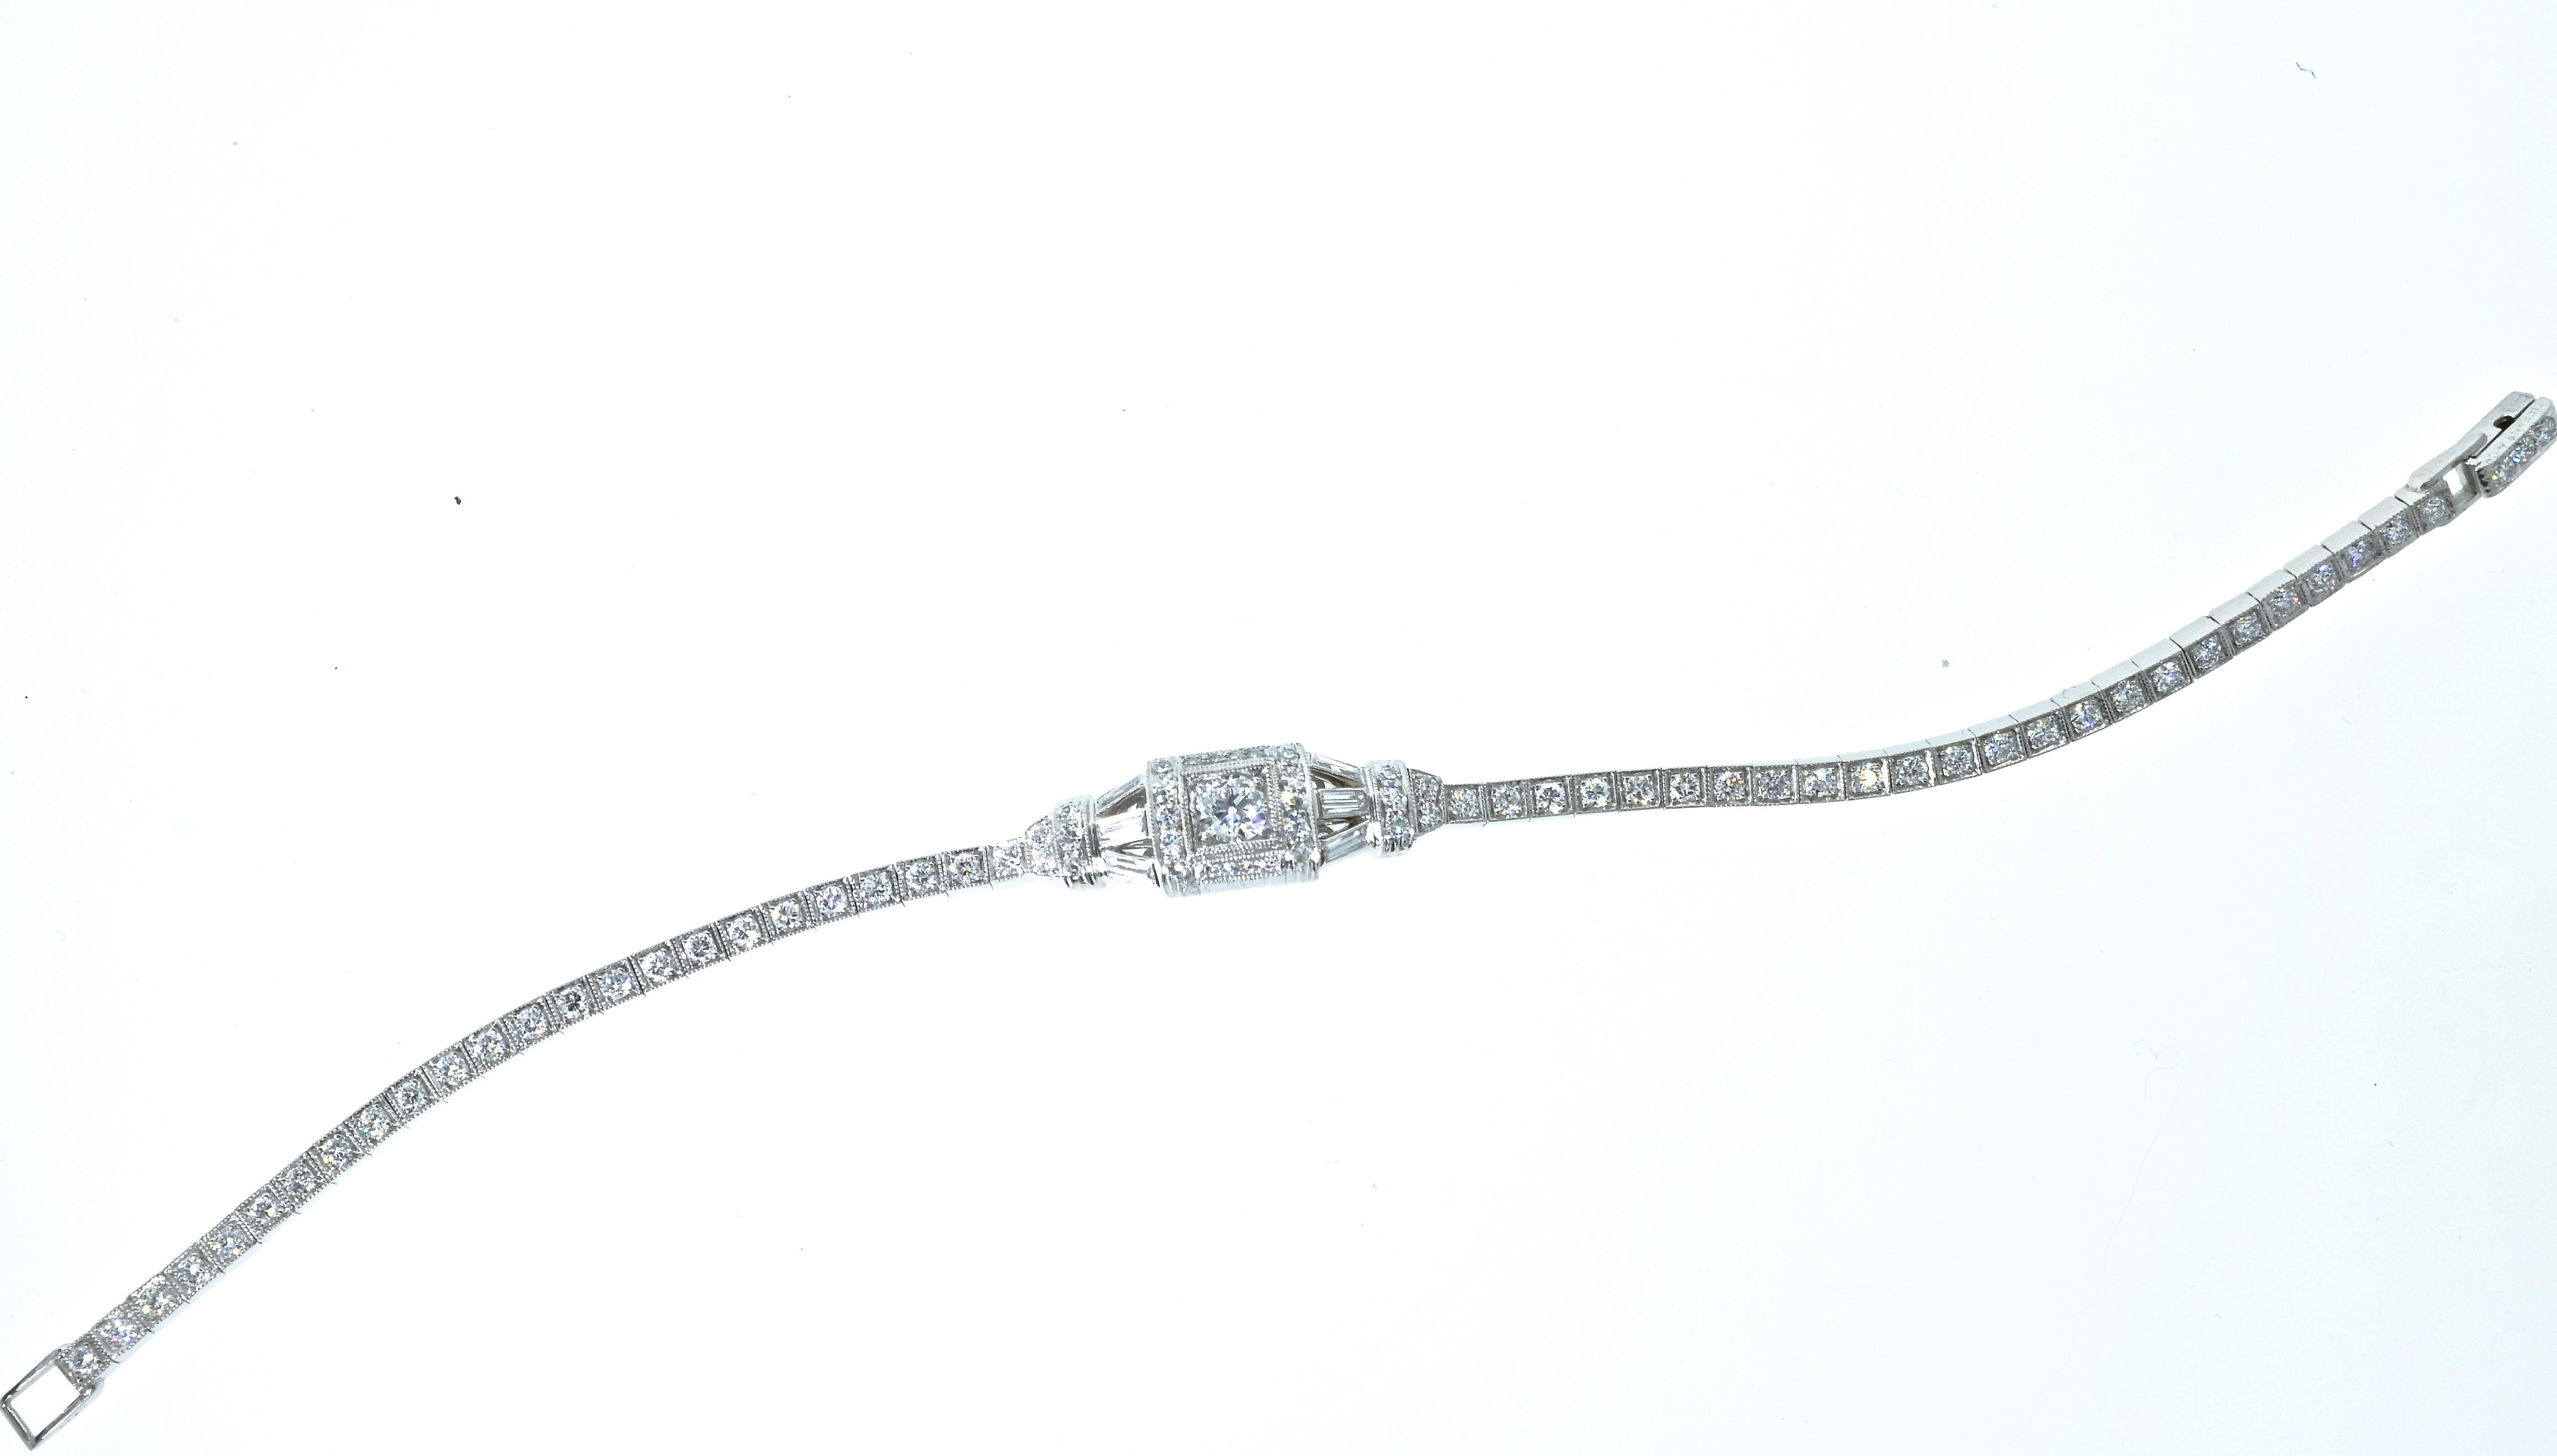 Tiffany & Co., platinum Art Deco diamond bracelet with 6 baguette cut diamonds in the center creating a geometric design continuing with round brilliant cut diamonds continuing down the sides of the bracelet.  There are 80 diamonds weighing slightly